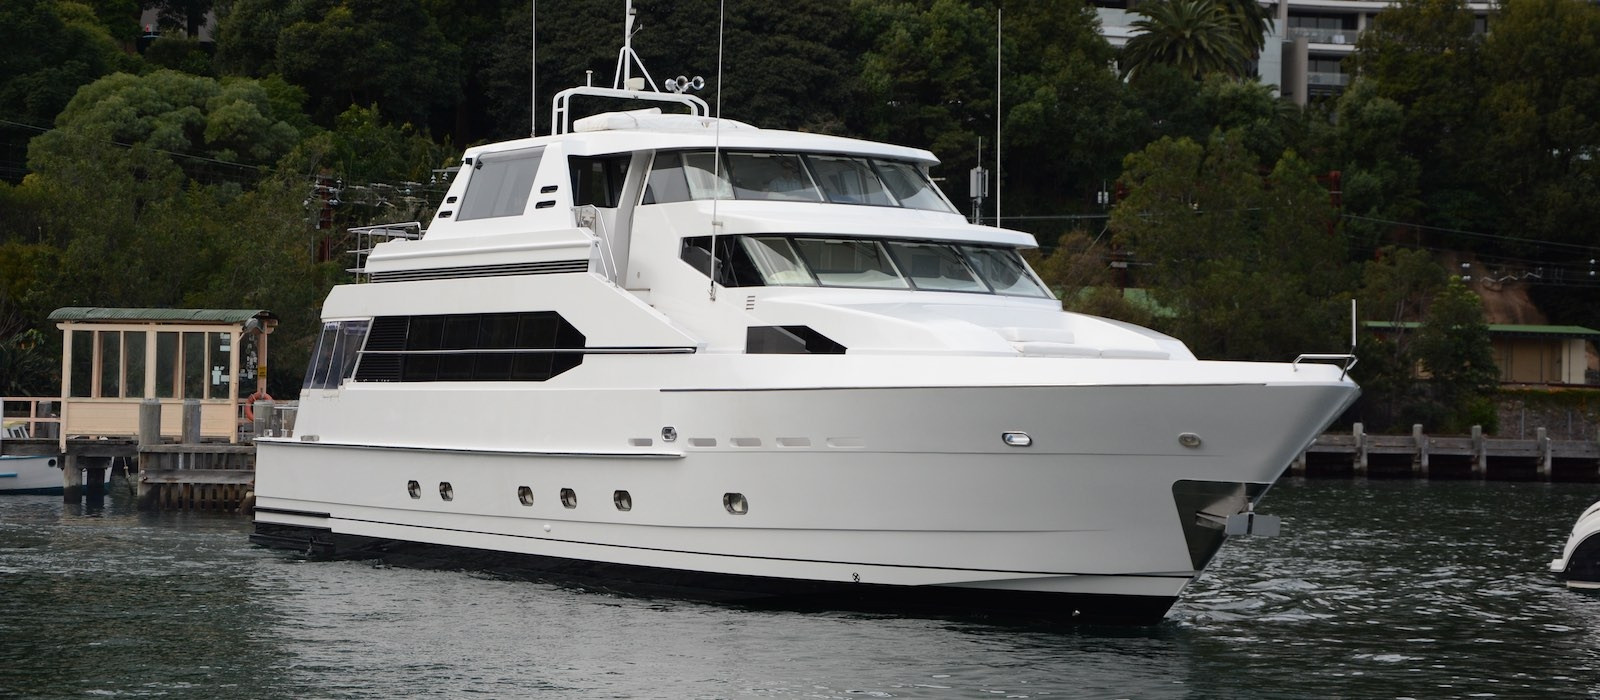 AQA luxury boat hire at Lavender Bay